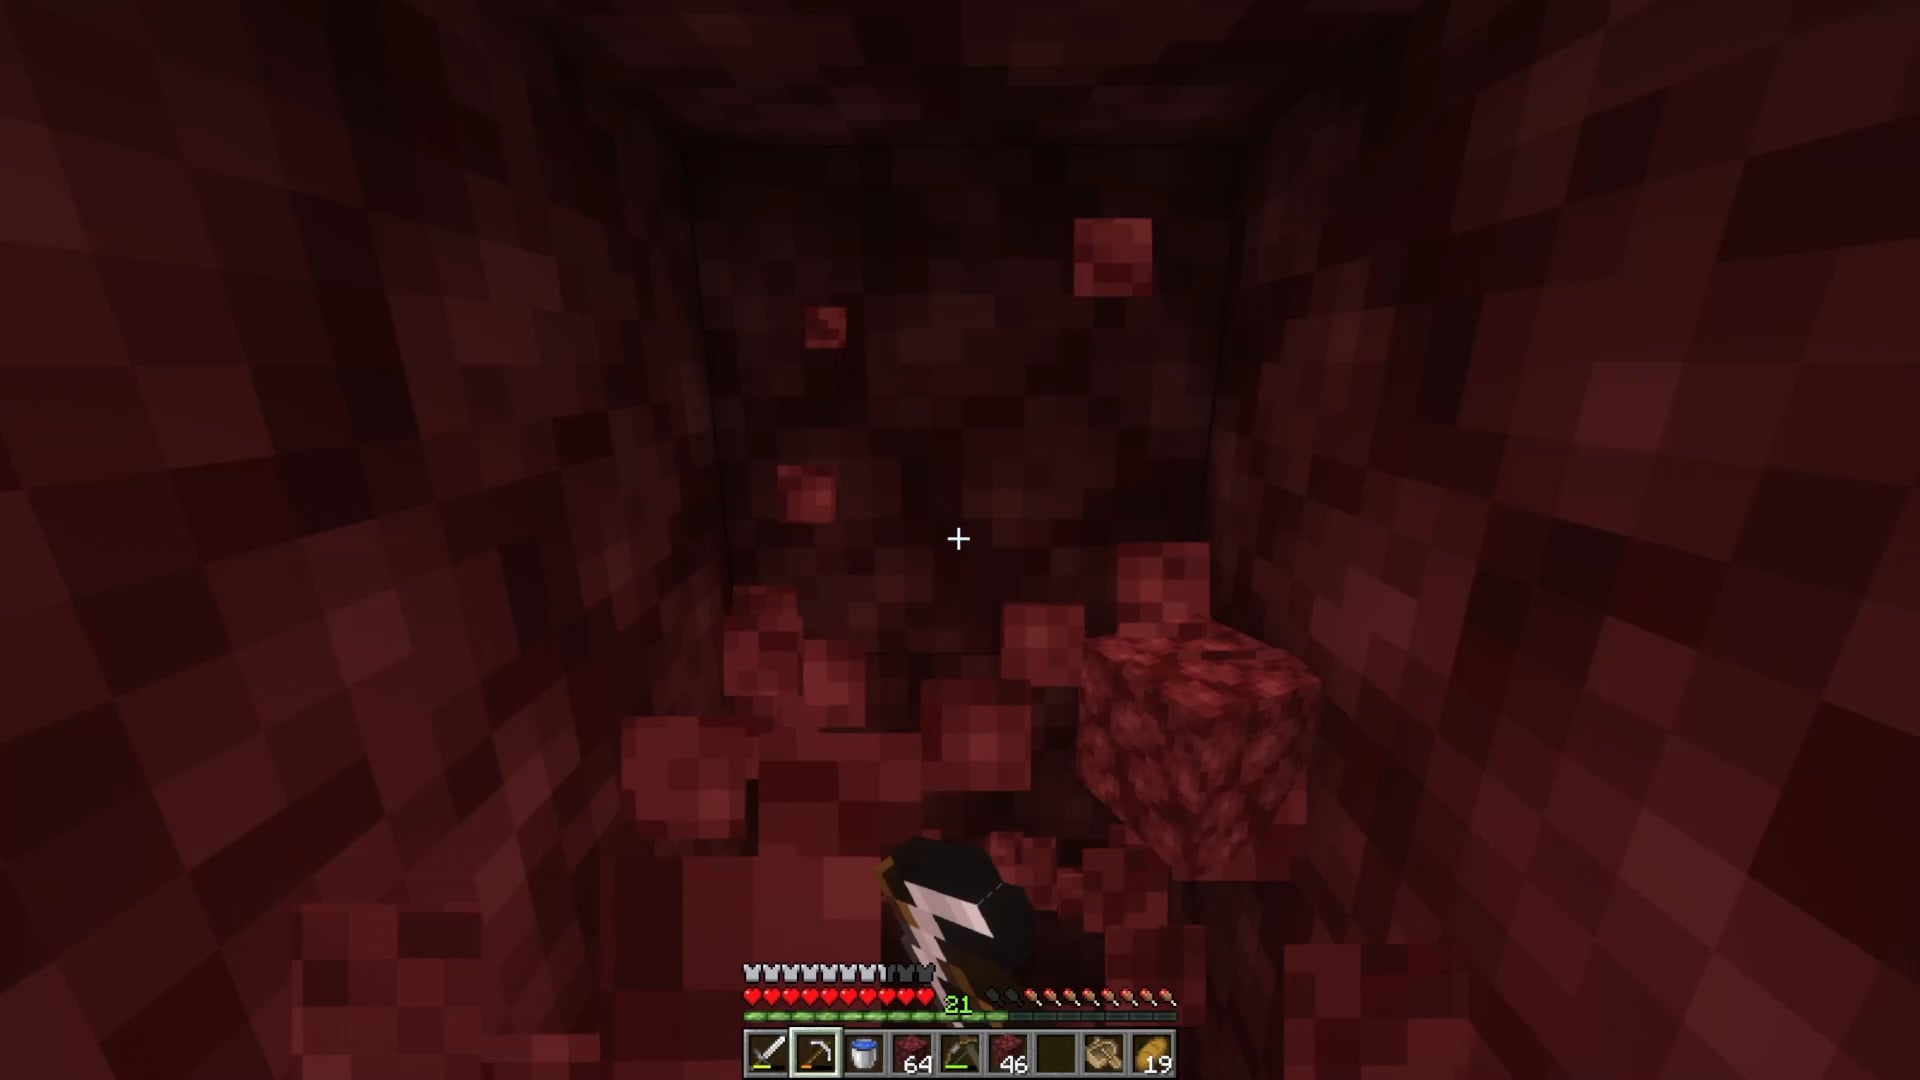 Minecraft Memes - "Wither: Ultimate Minecraft Pain"